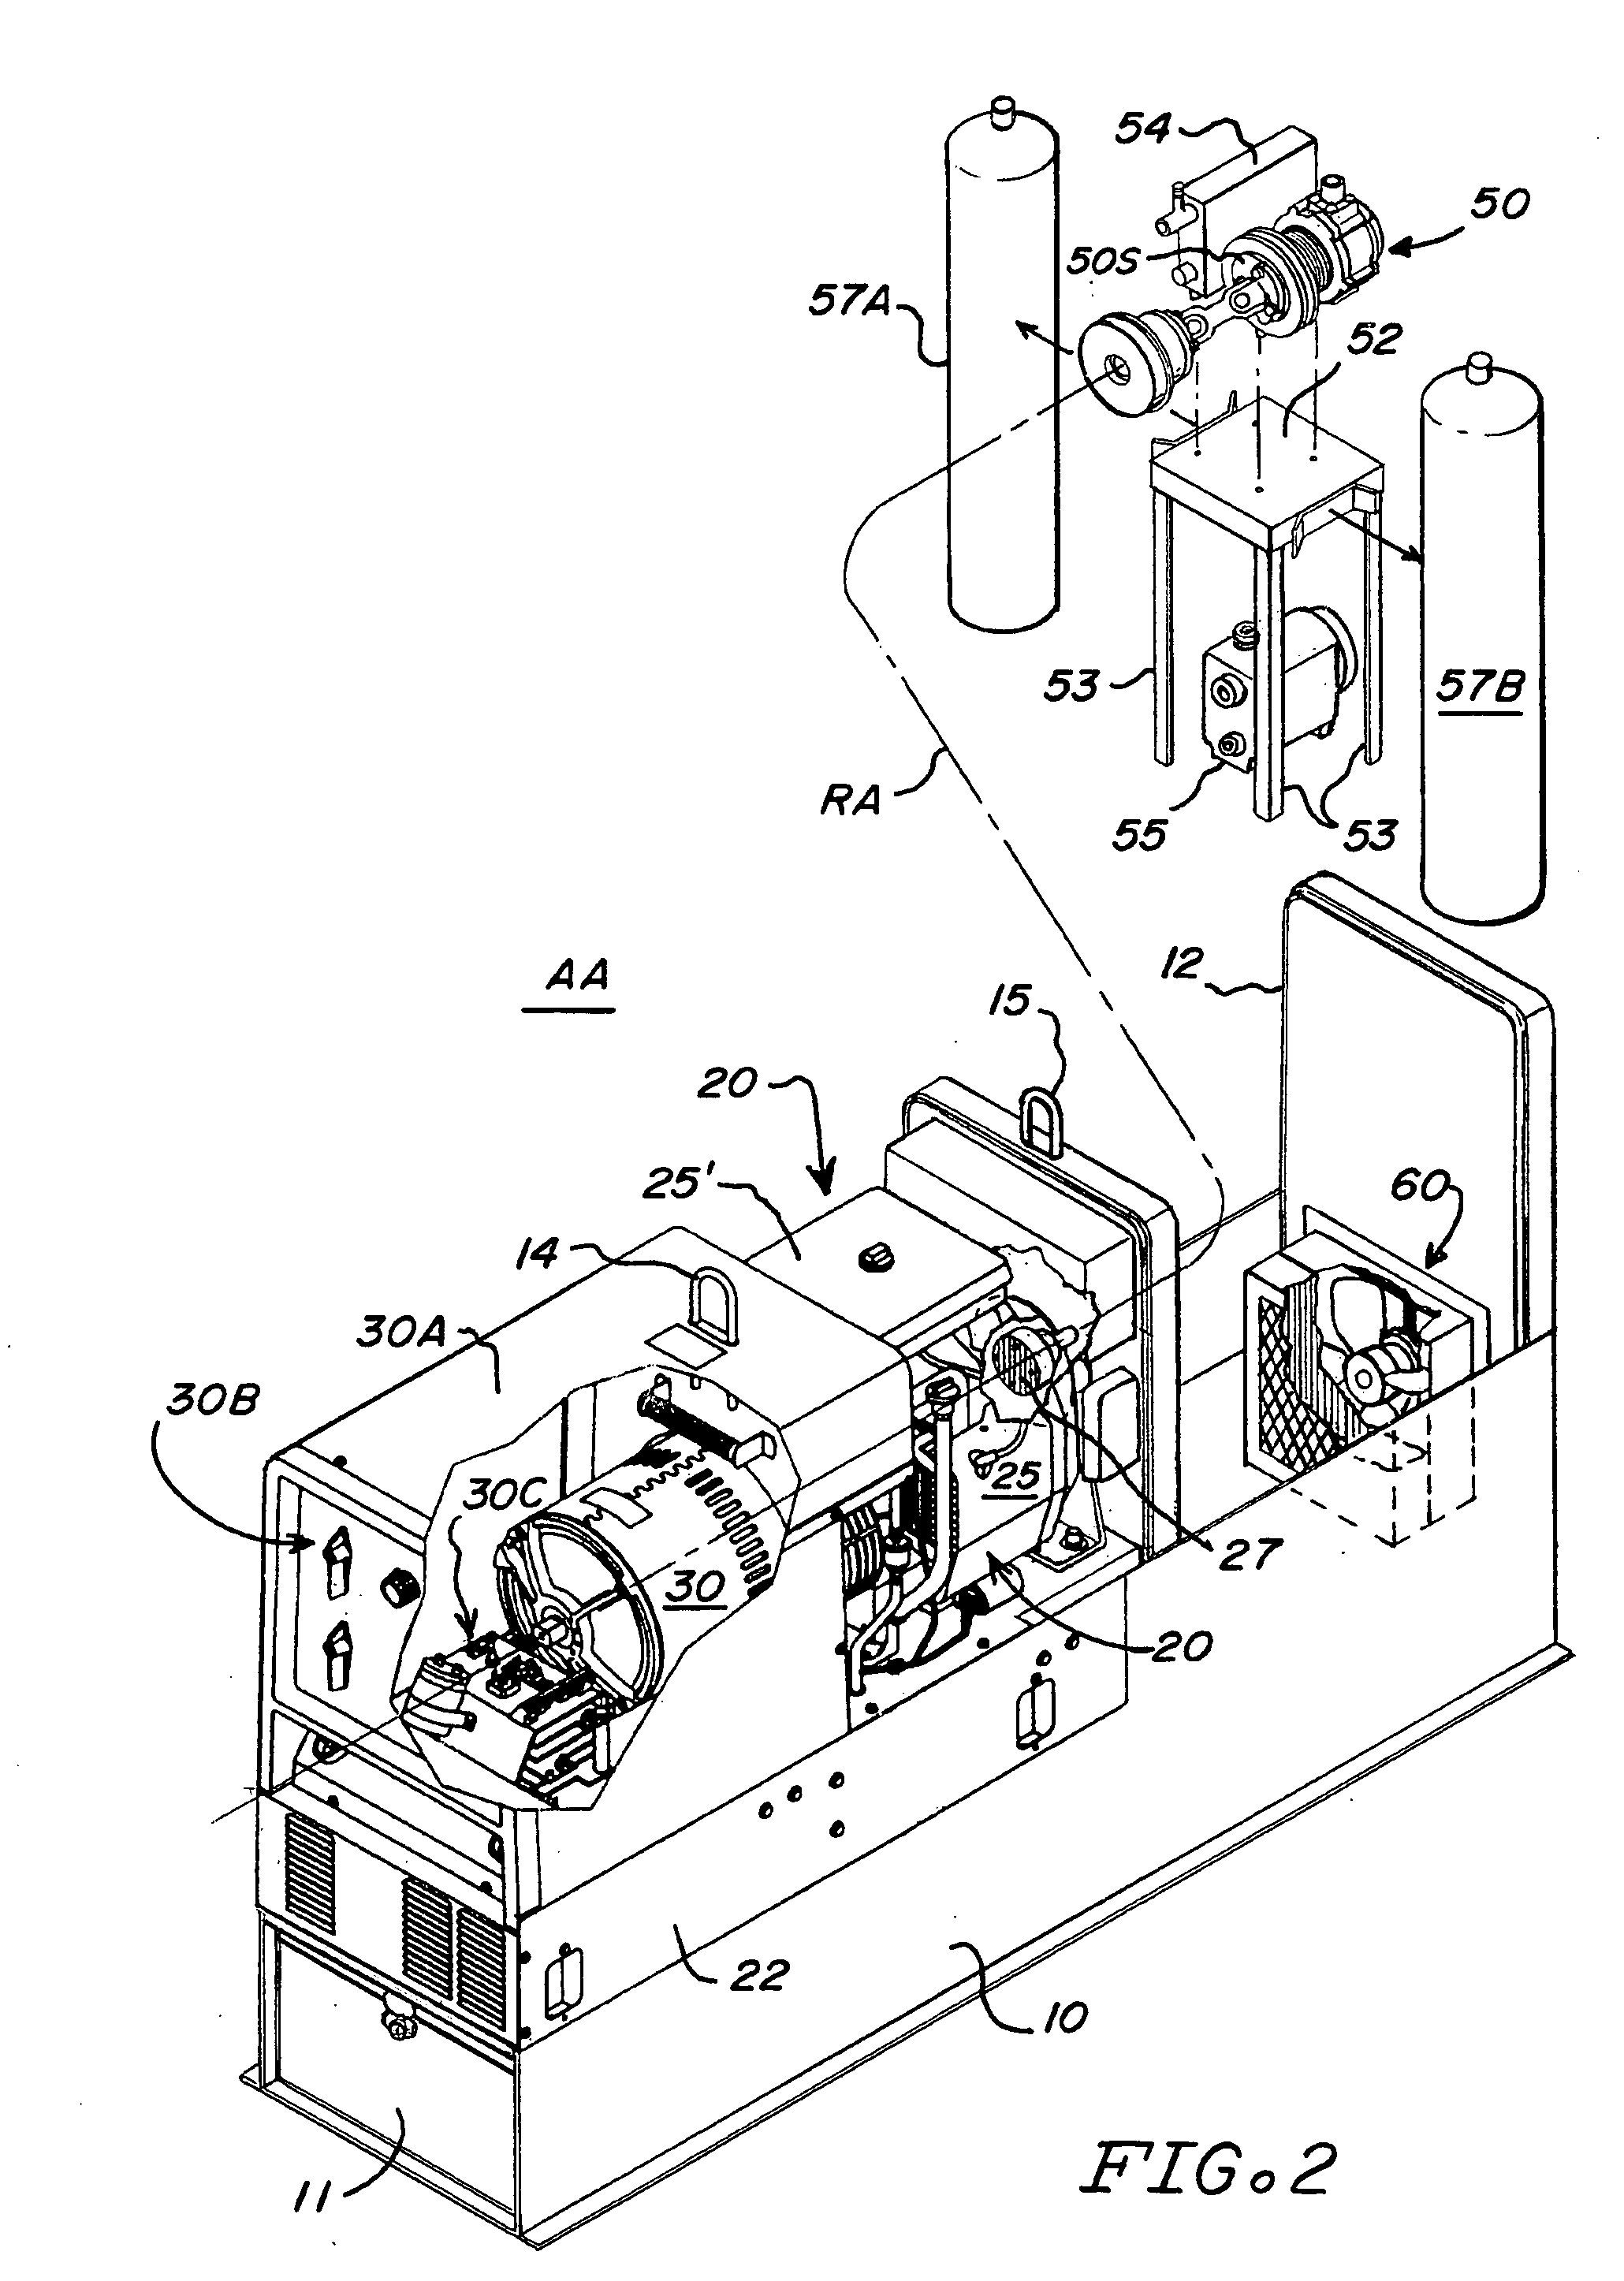 Multi-function integrated portable power and utility apparatus